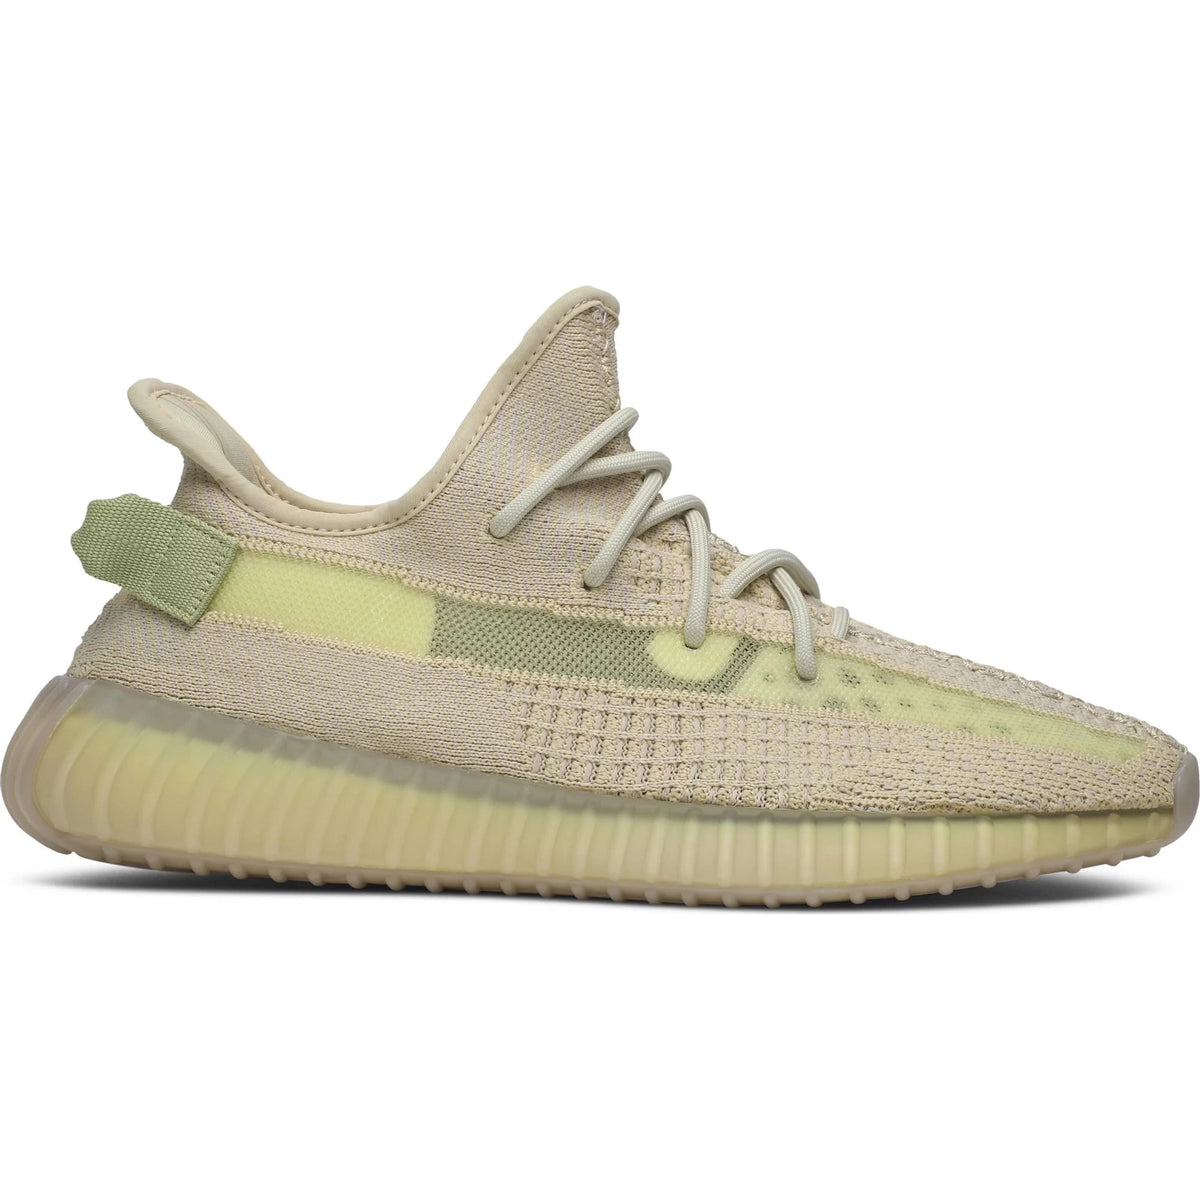 Adidas Yeezy Boost 350 V2 Flax | Waves Never Die | Adidas | Sneakers